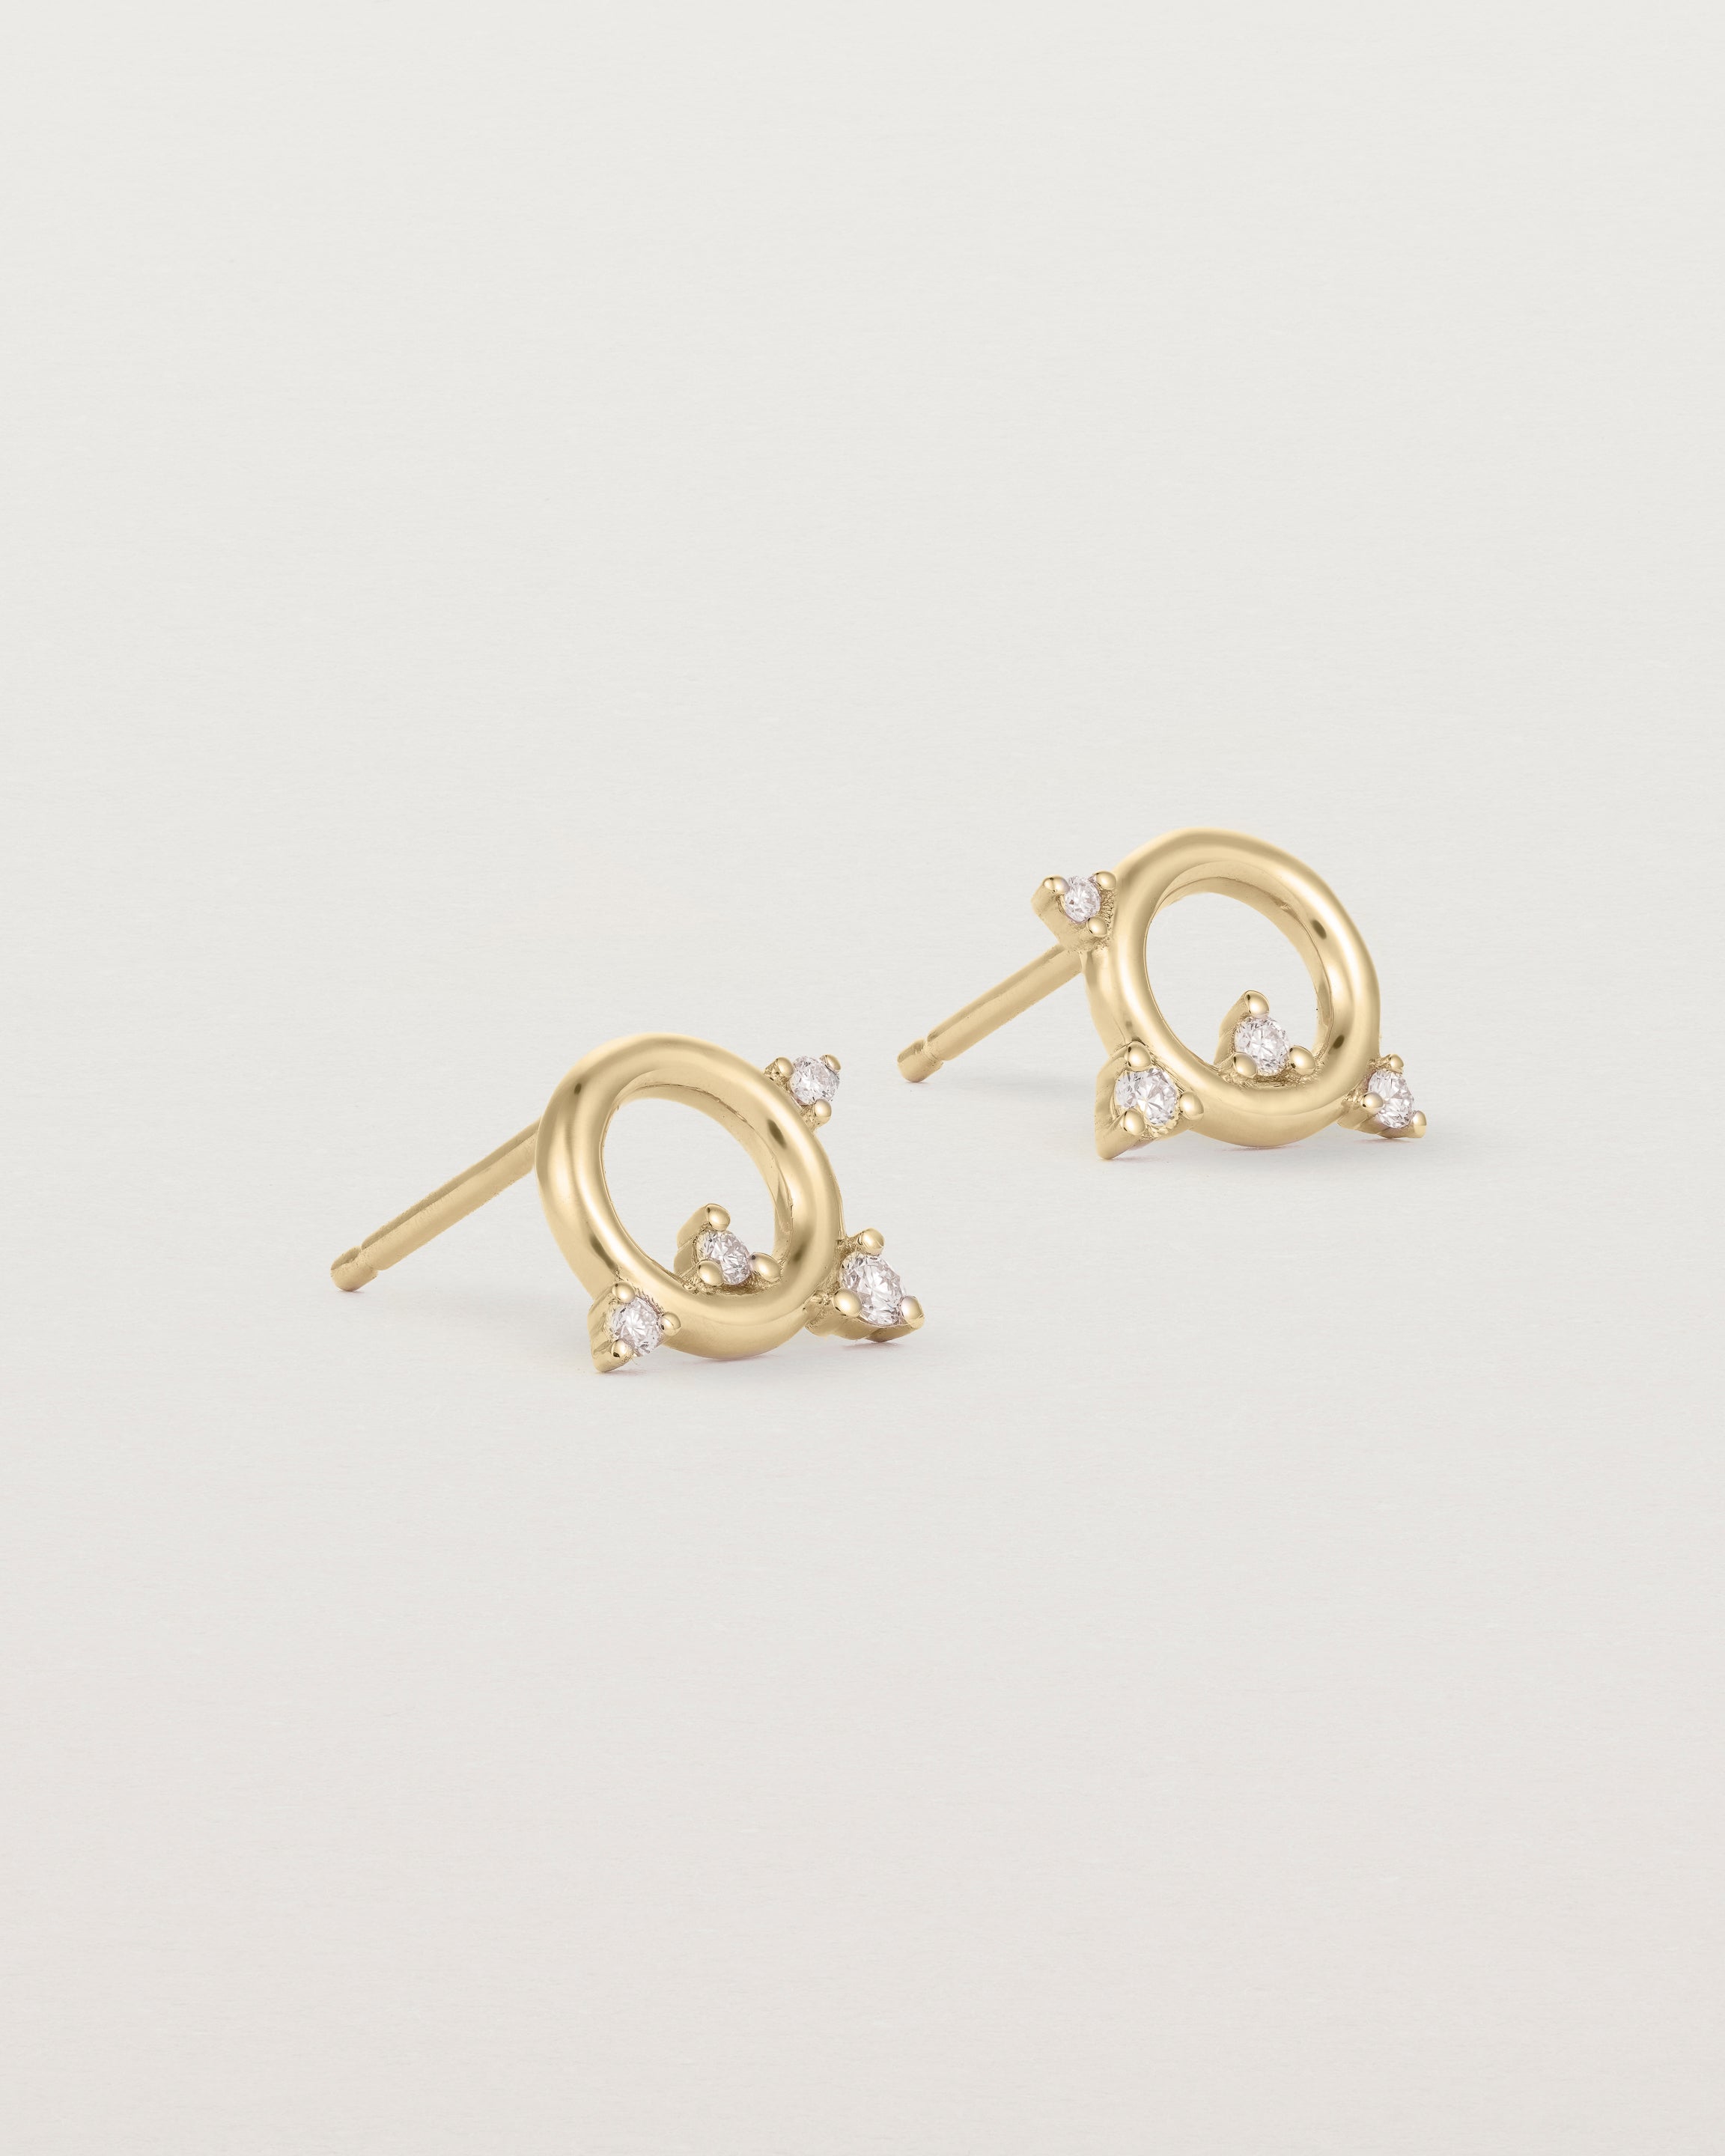 A pair of circular yellow gold studs with four white diamonds